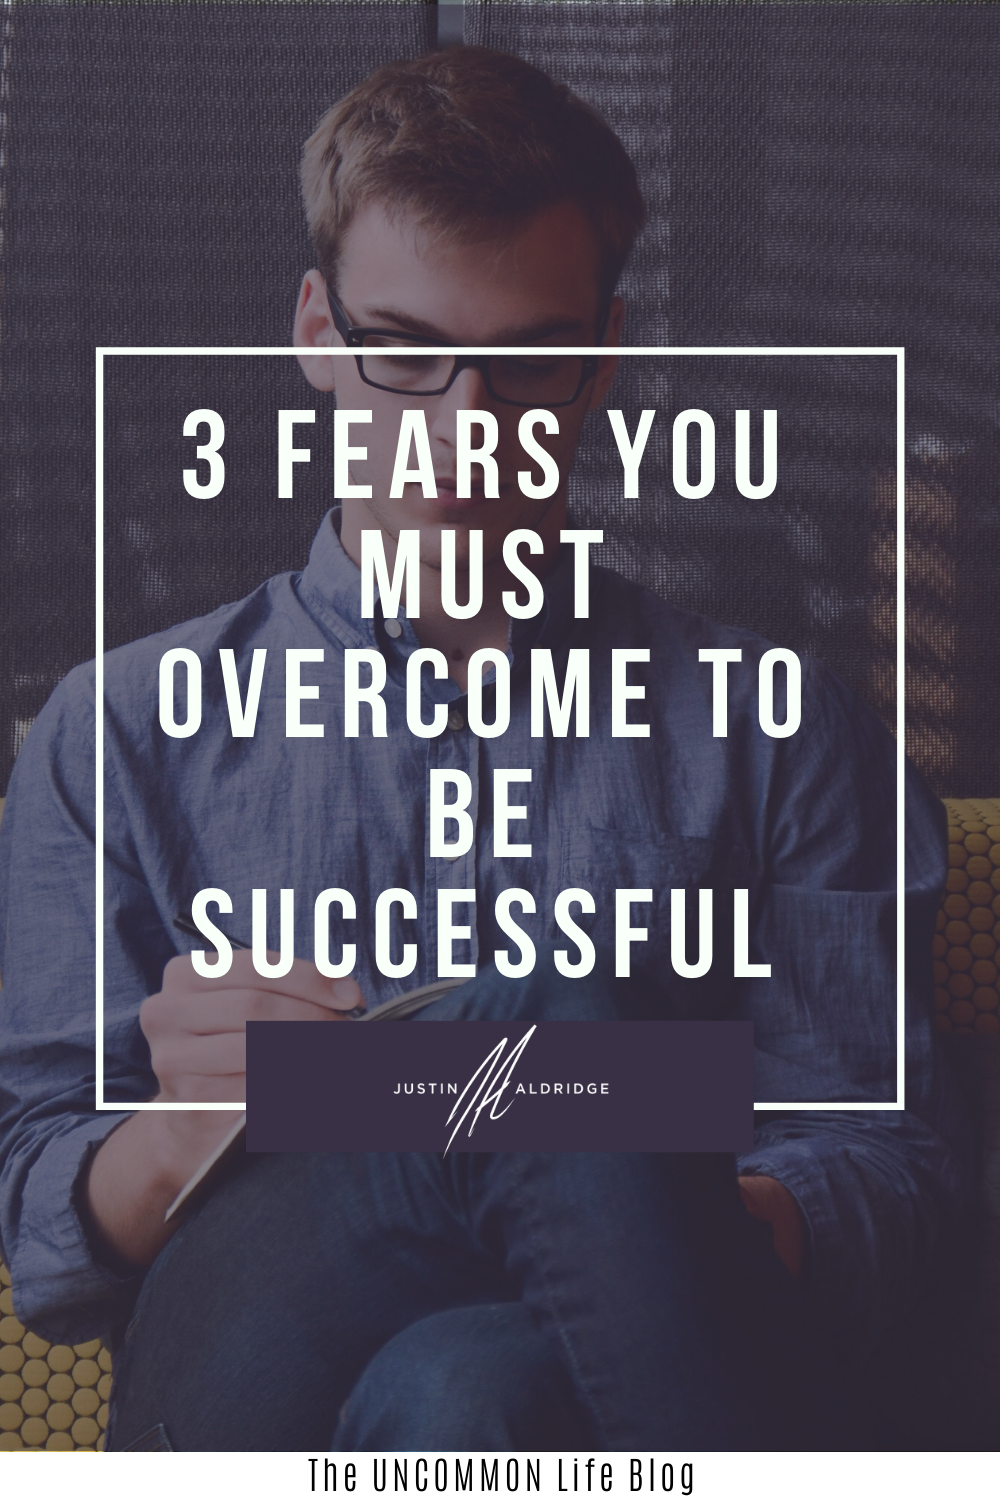 Man in sitting on a couch writing in the background behind the text, “3 fears you MUST overcome to be successful” in white font